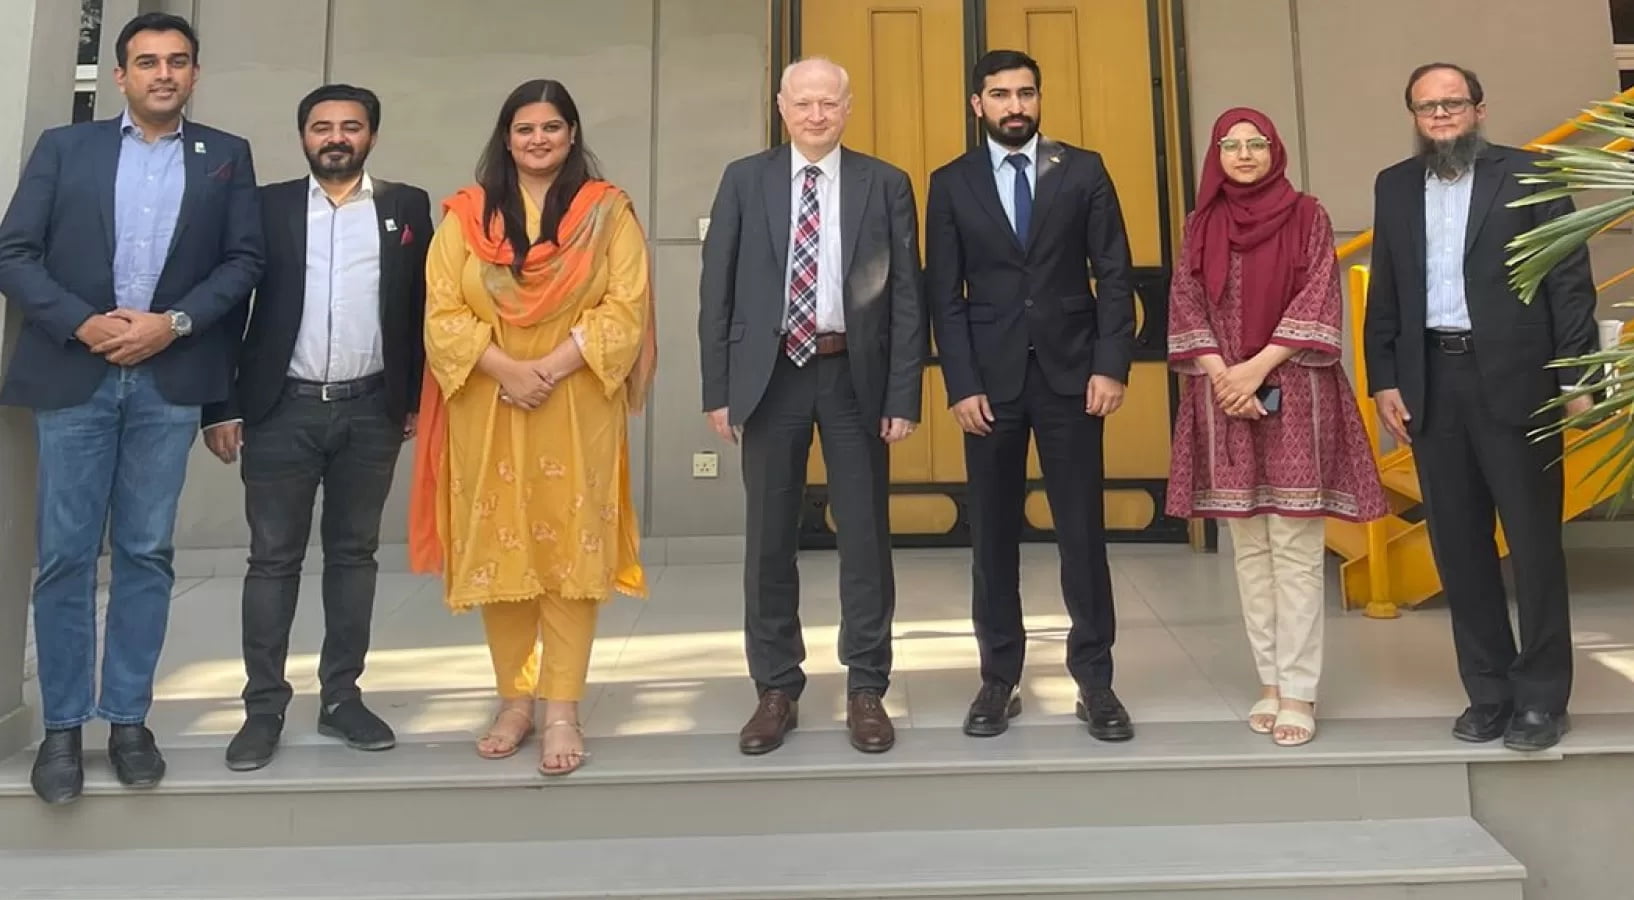 AHK and National Incubation Center Karachi discuss collaboration and partnership opportunities